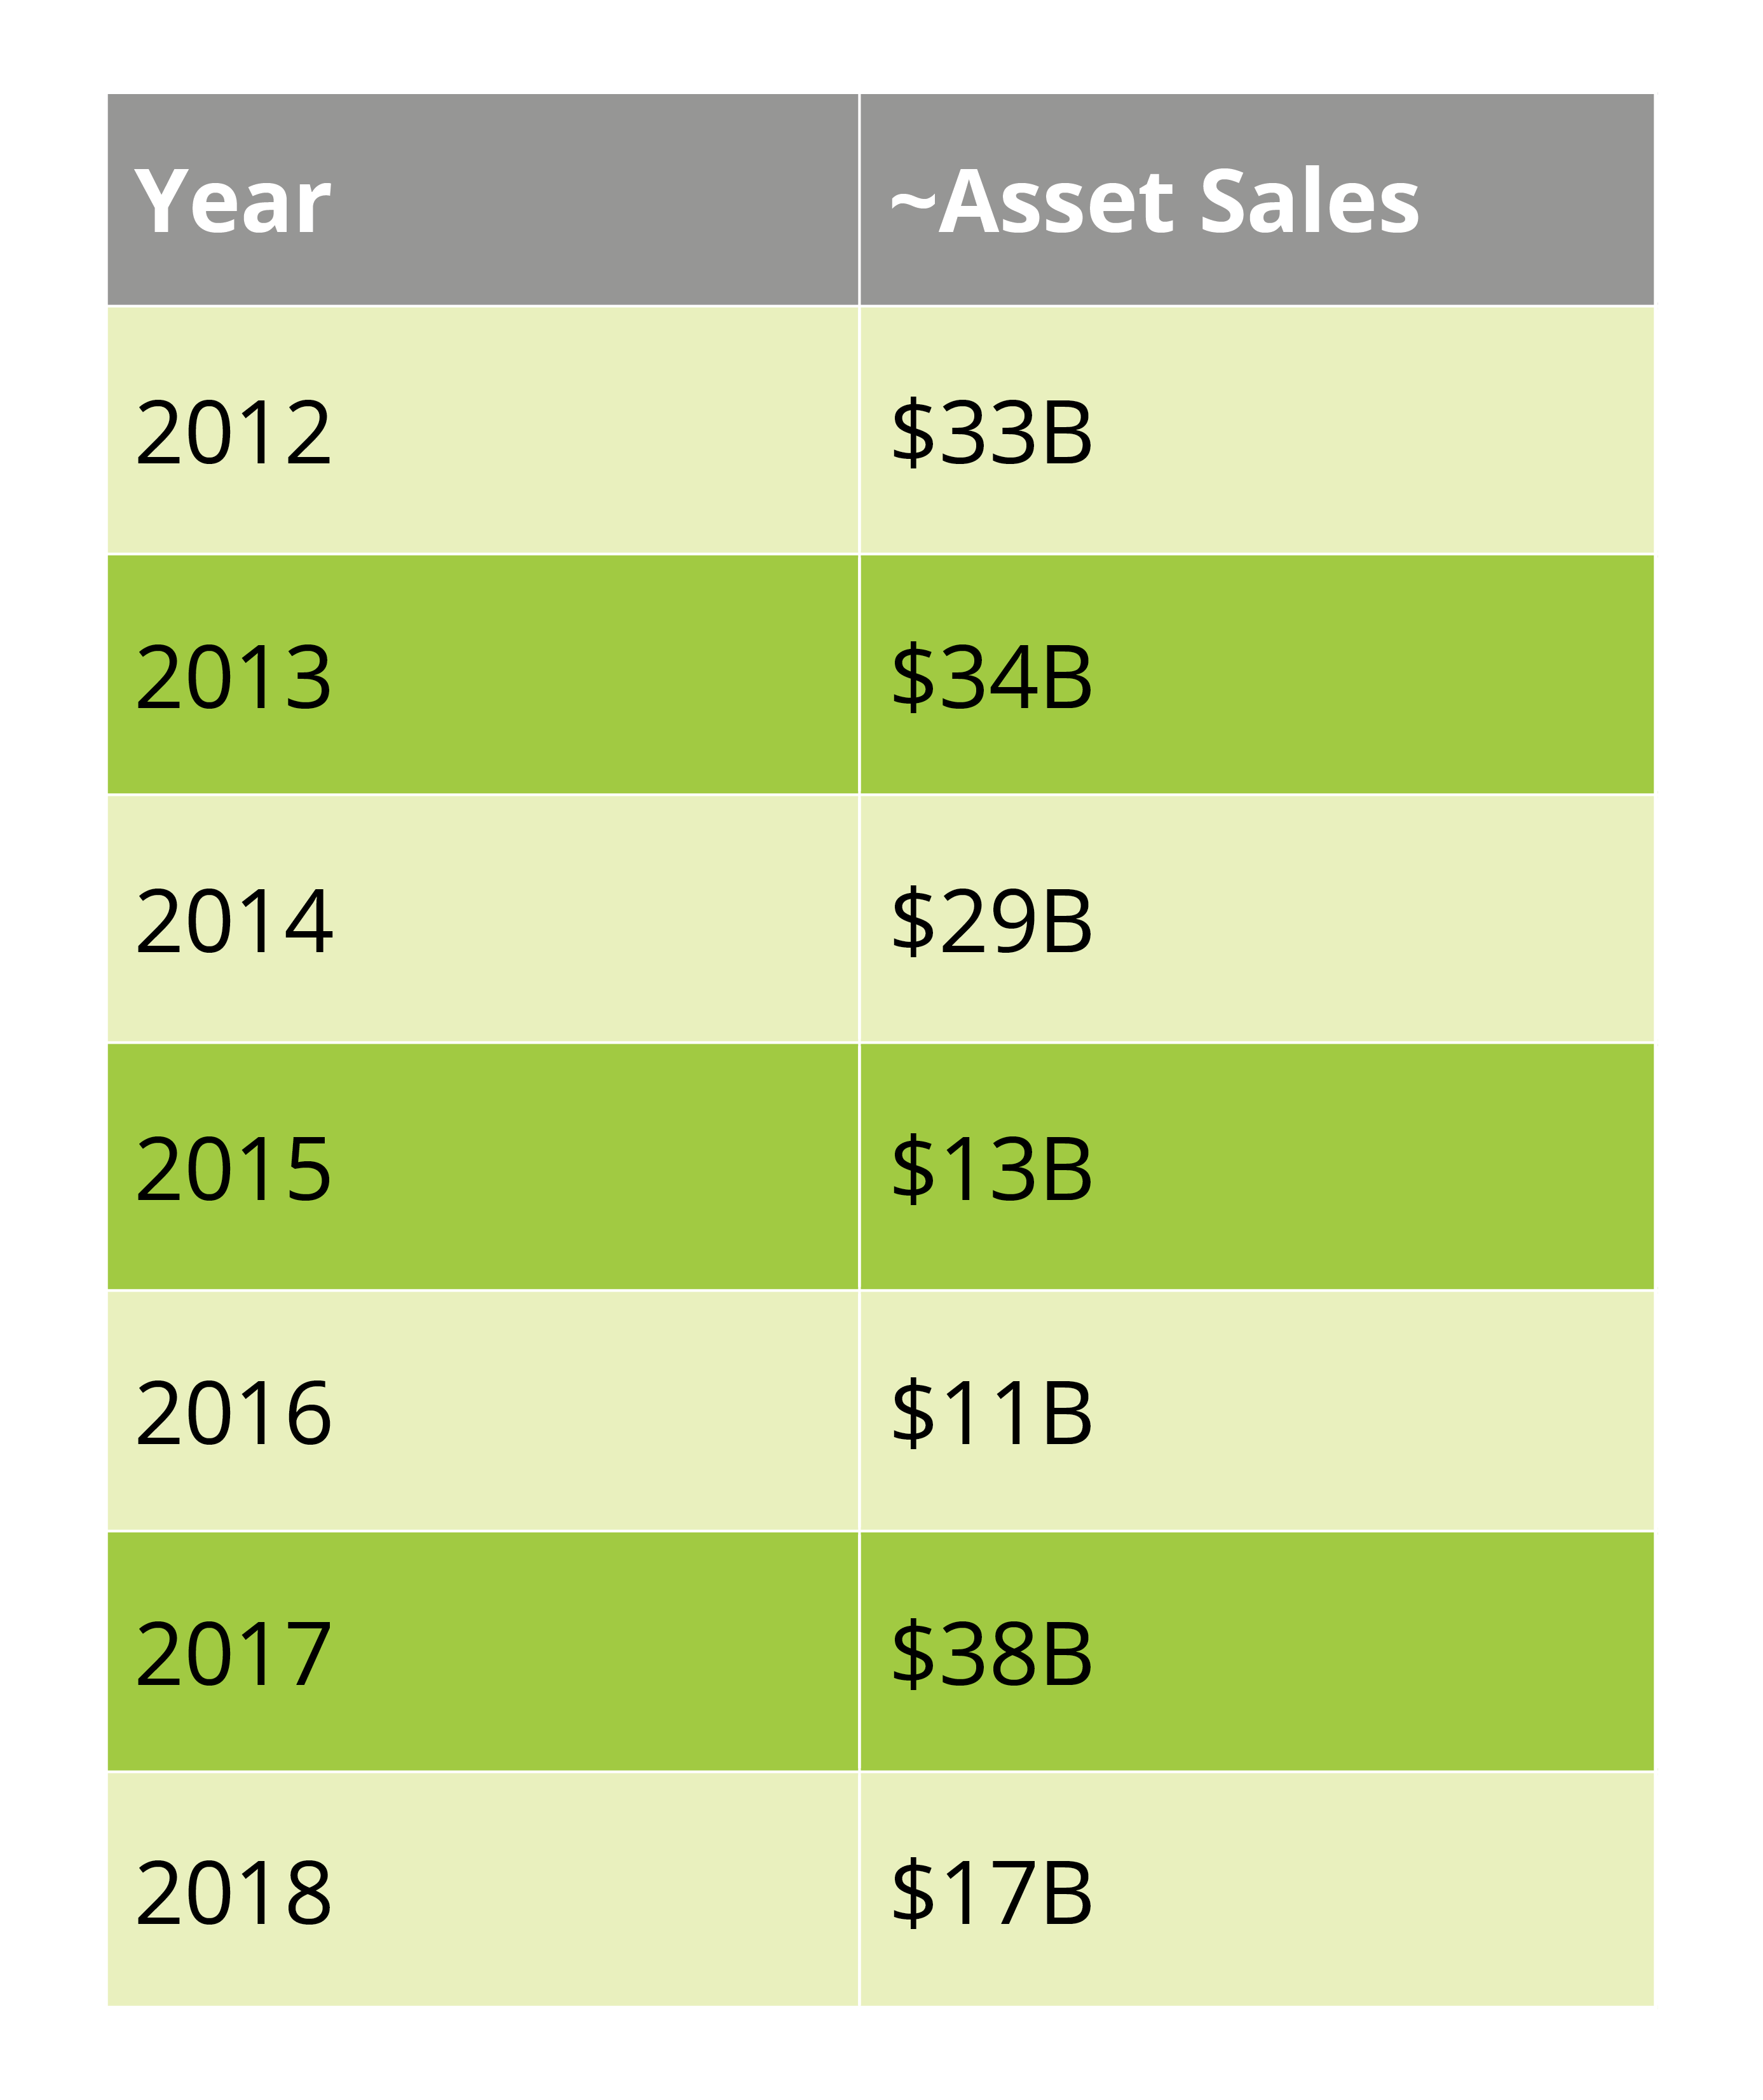 Total annual asset sales for oil and gas majors 2012 - 2018